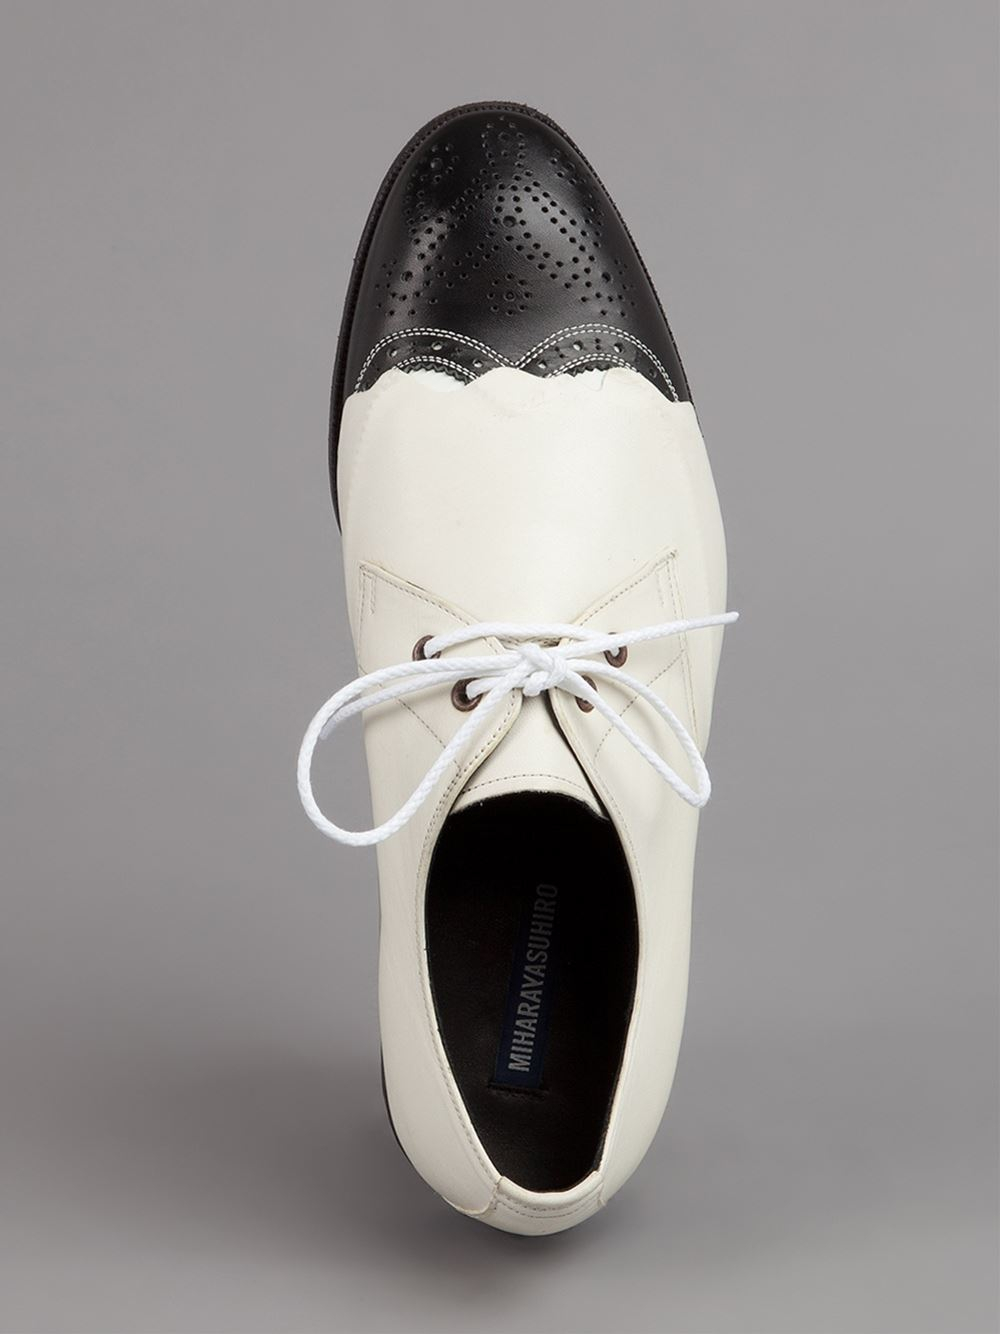 Lyst - Miharayasuhiro Two Tone Leather Shoe in White for Men